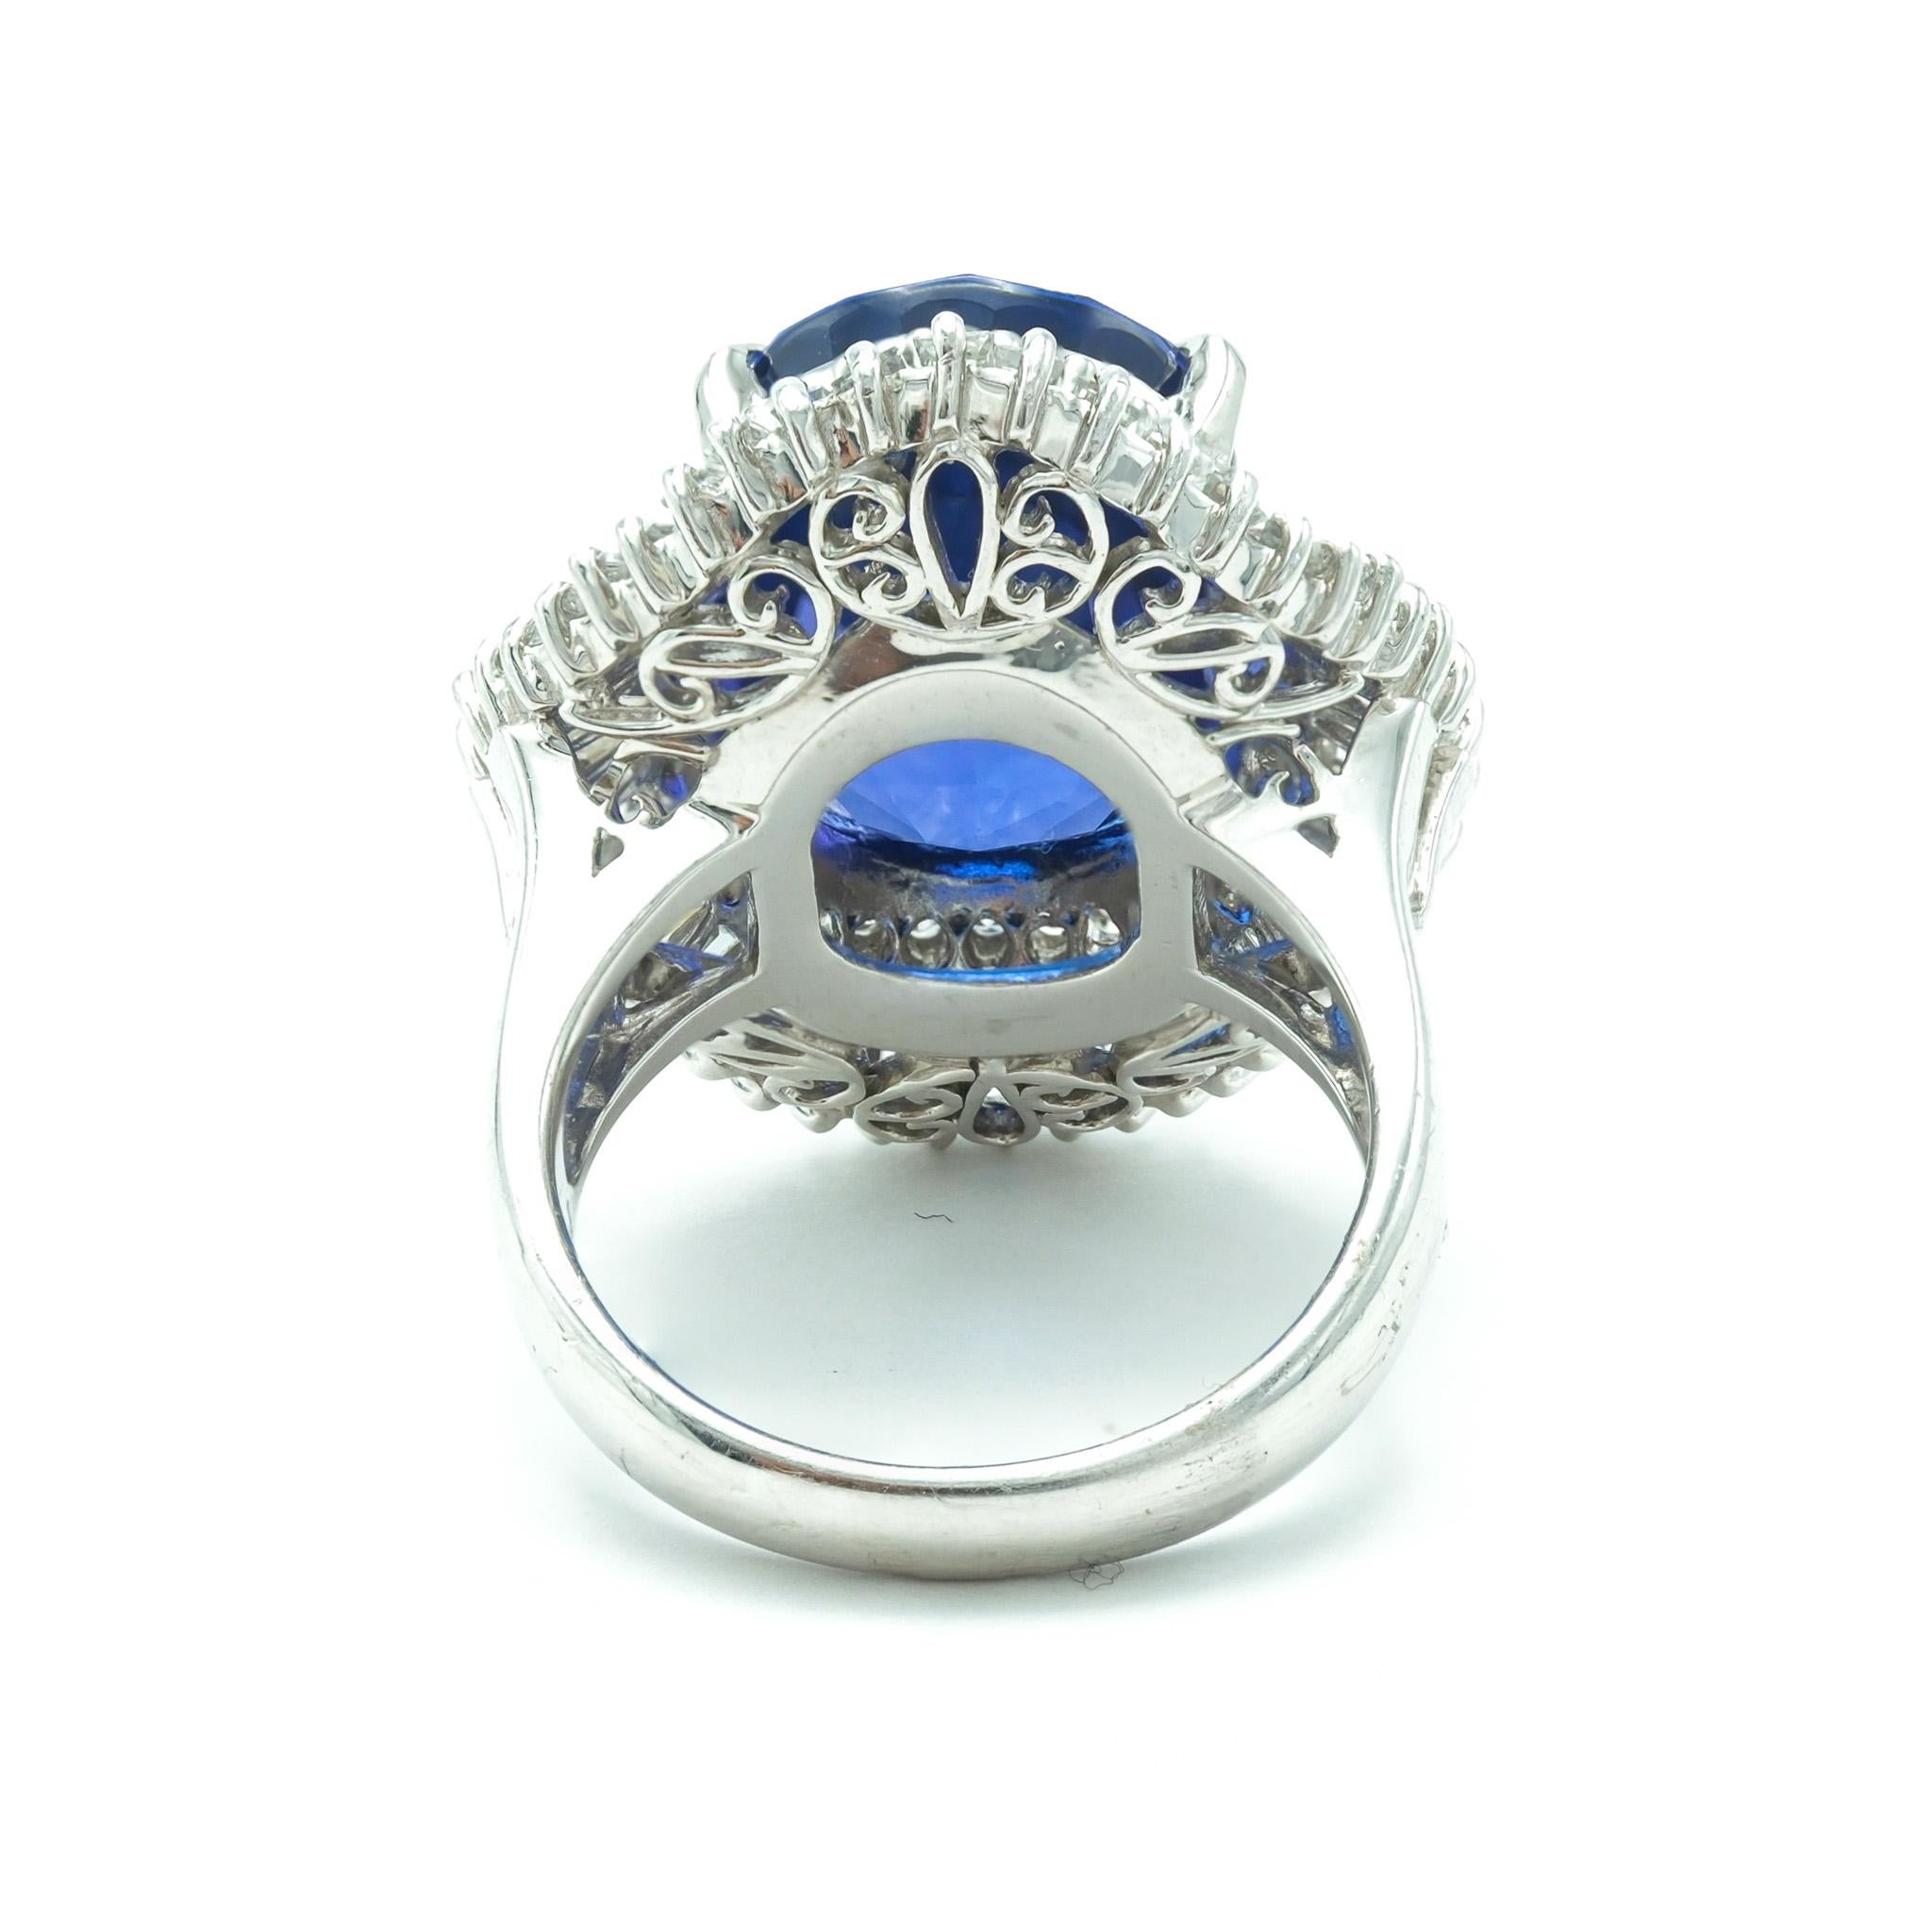 Contemporary 16.2 Carat Tanzanite and Ballerina Diamond Mounting Cocktail Ring For Sale